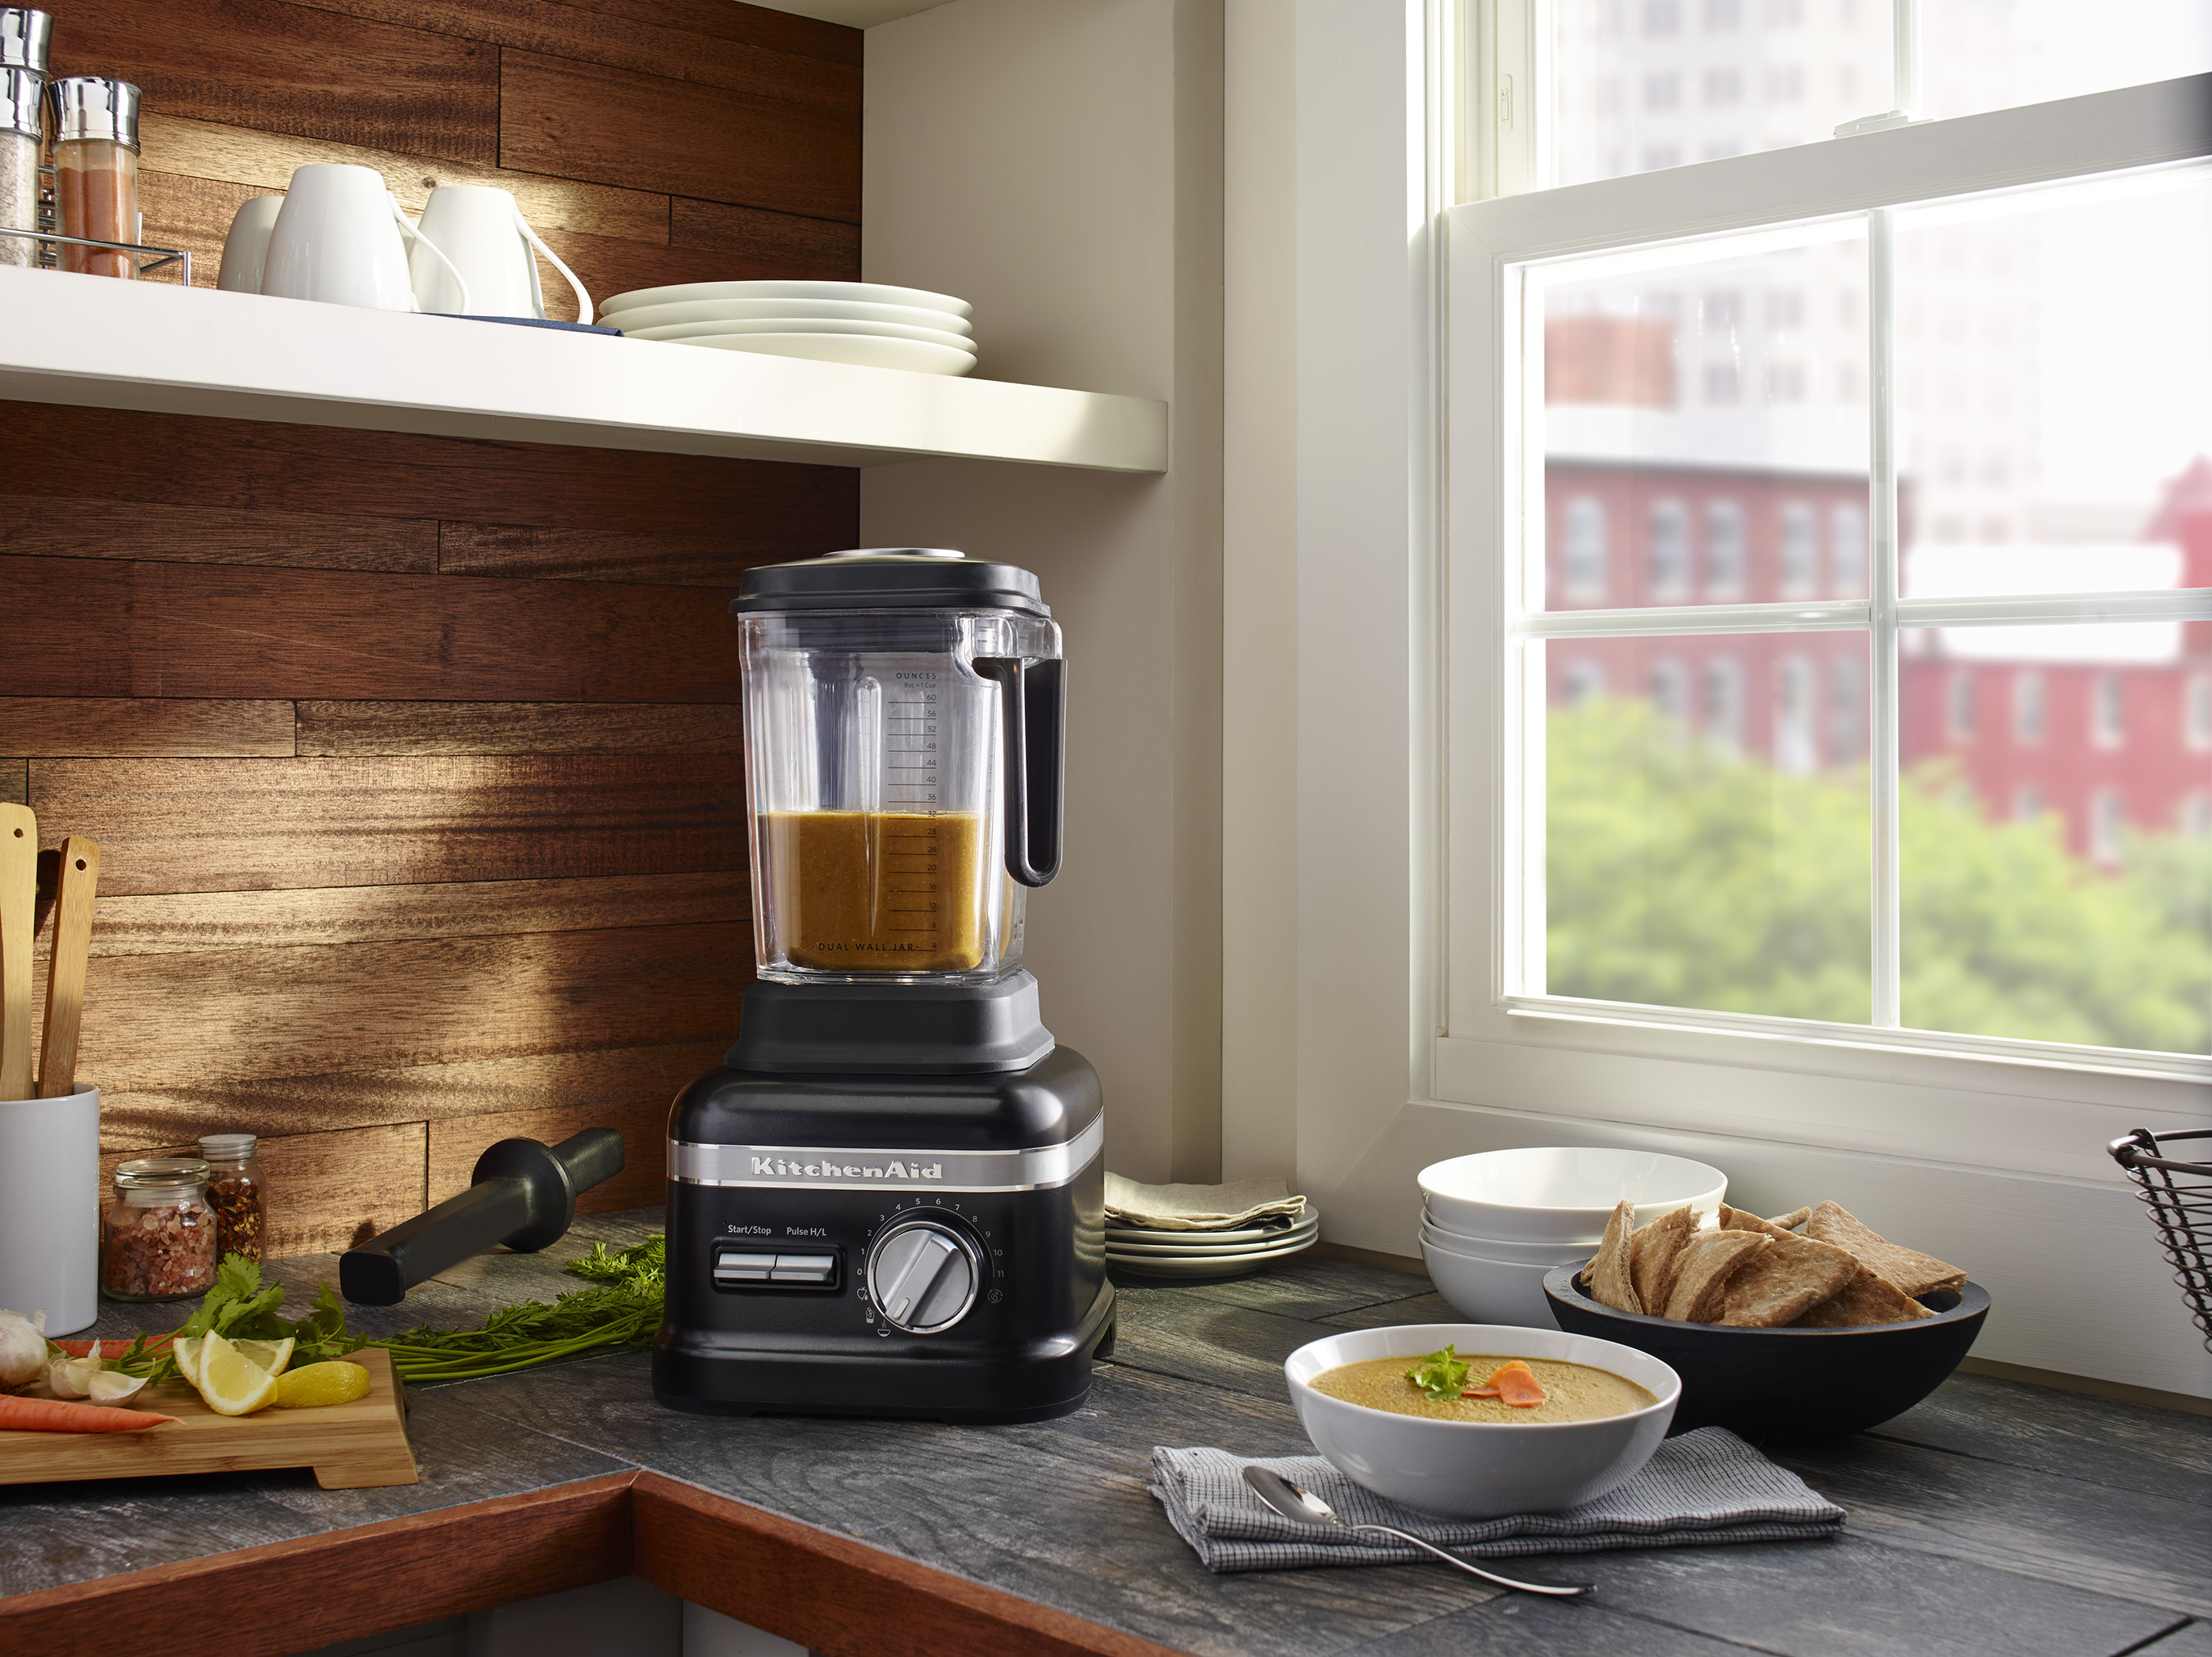 The upgraded models provide the added convenience of a dual-wall Thermal Control jar and three pre-set Adapti-Blend™ recipe programs for Soup, Juices and Smoothies.